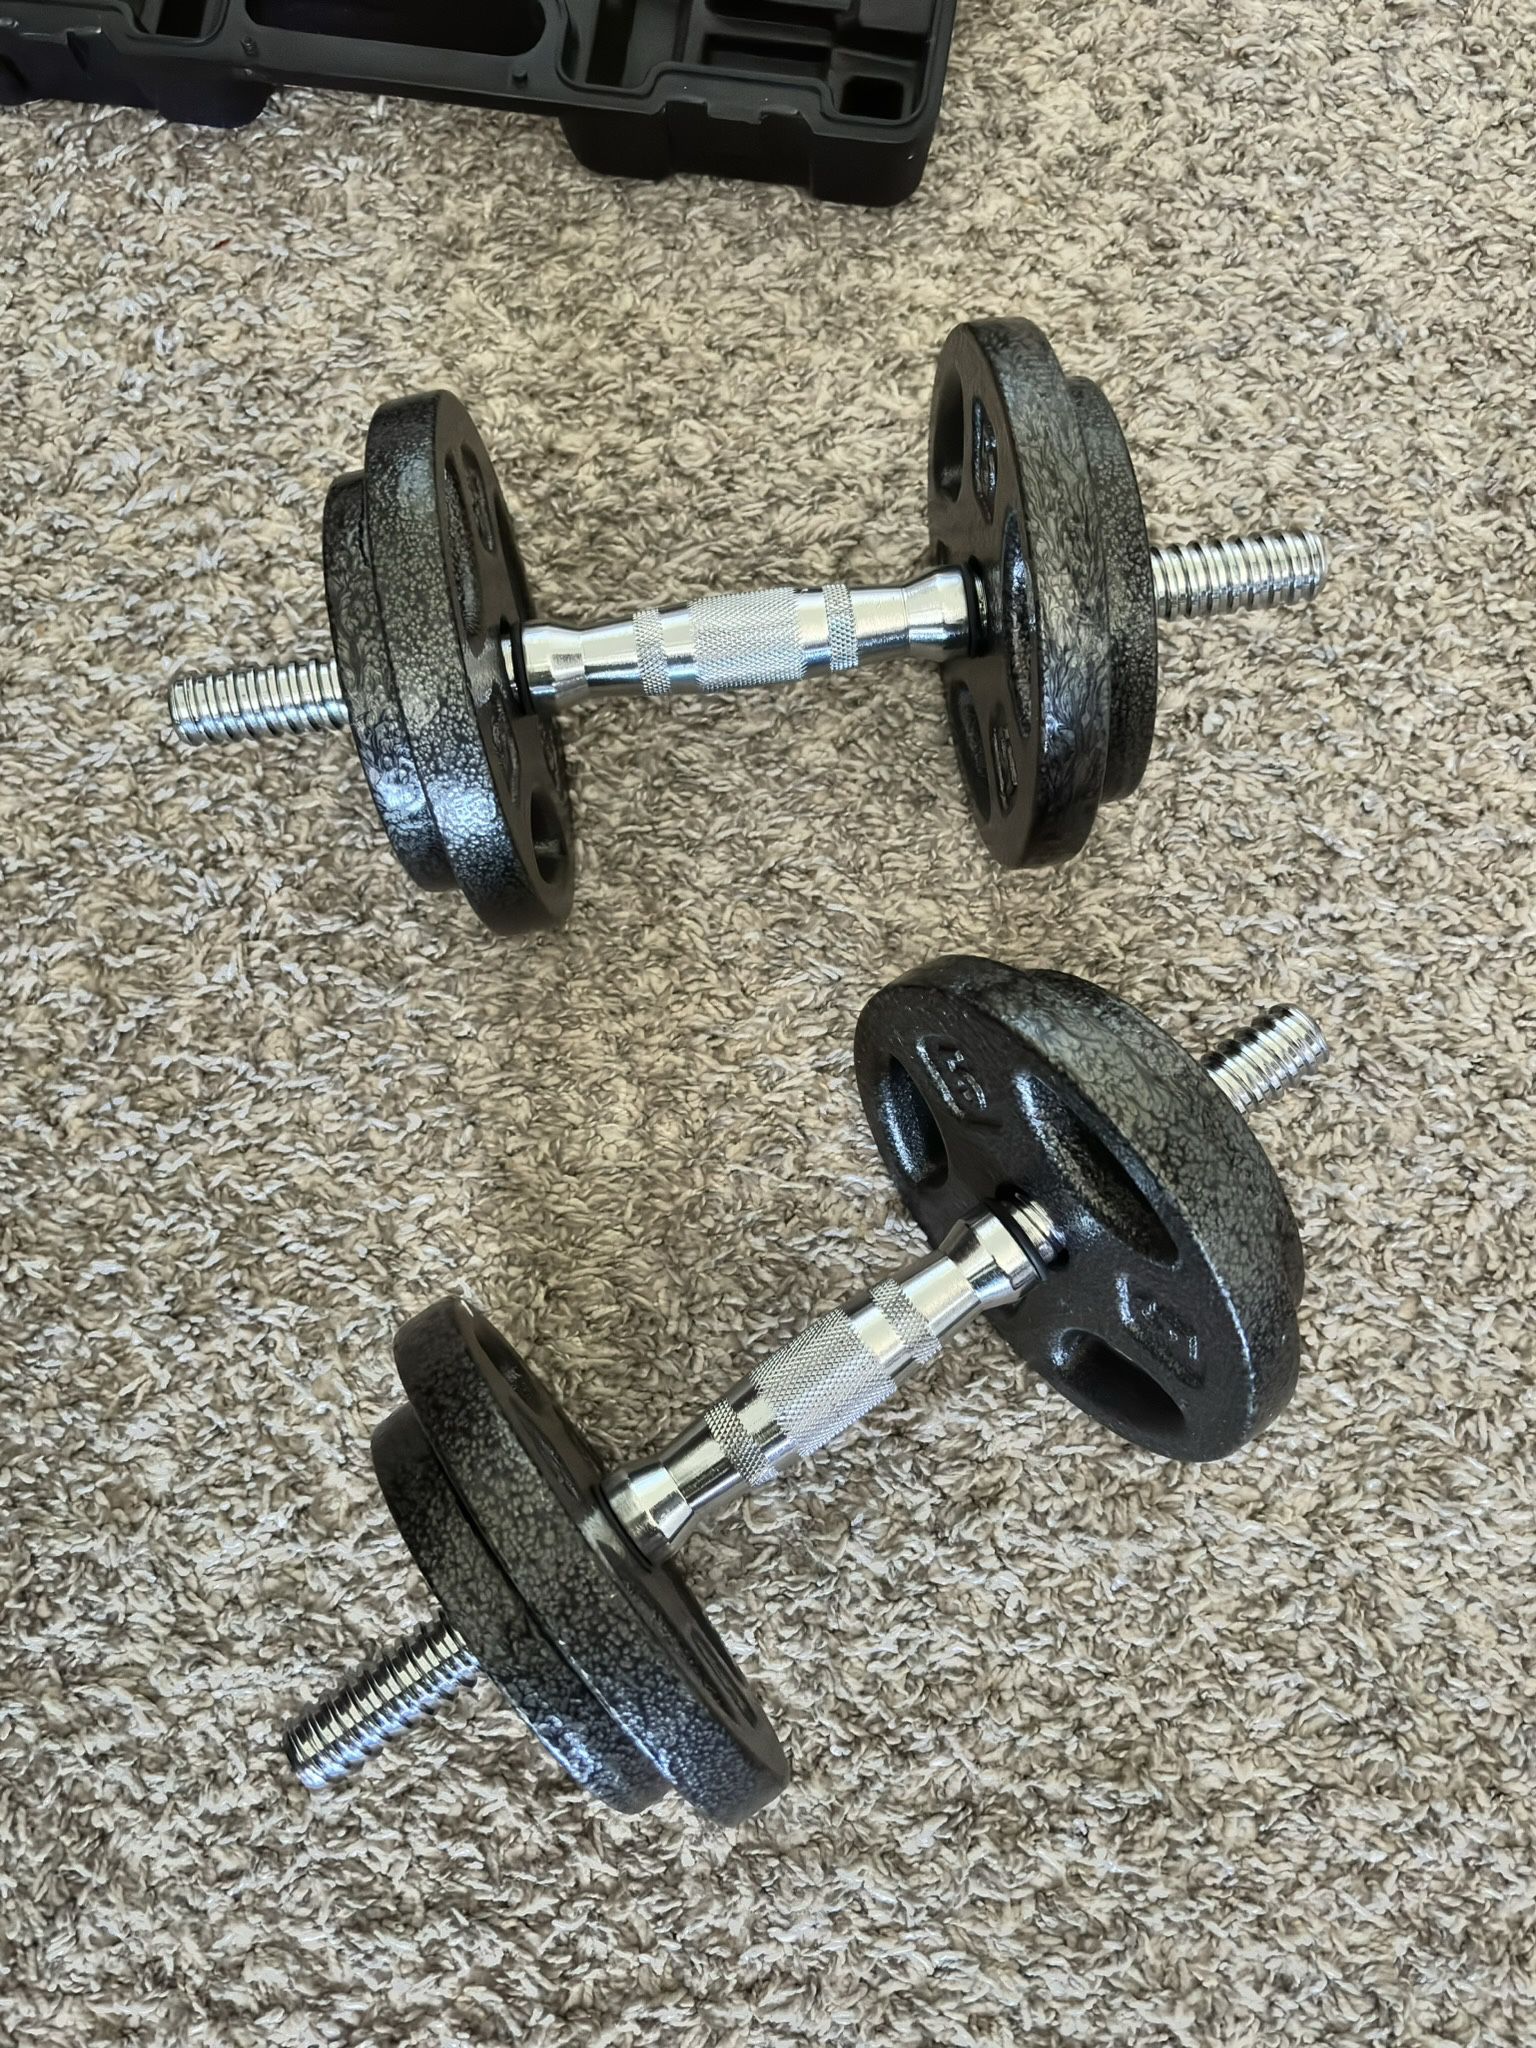 Cast Iron Adjustable Dumbbell Weight Set with Case - $70 obo